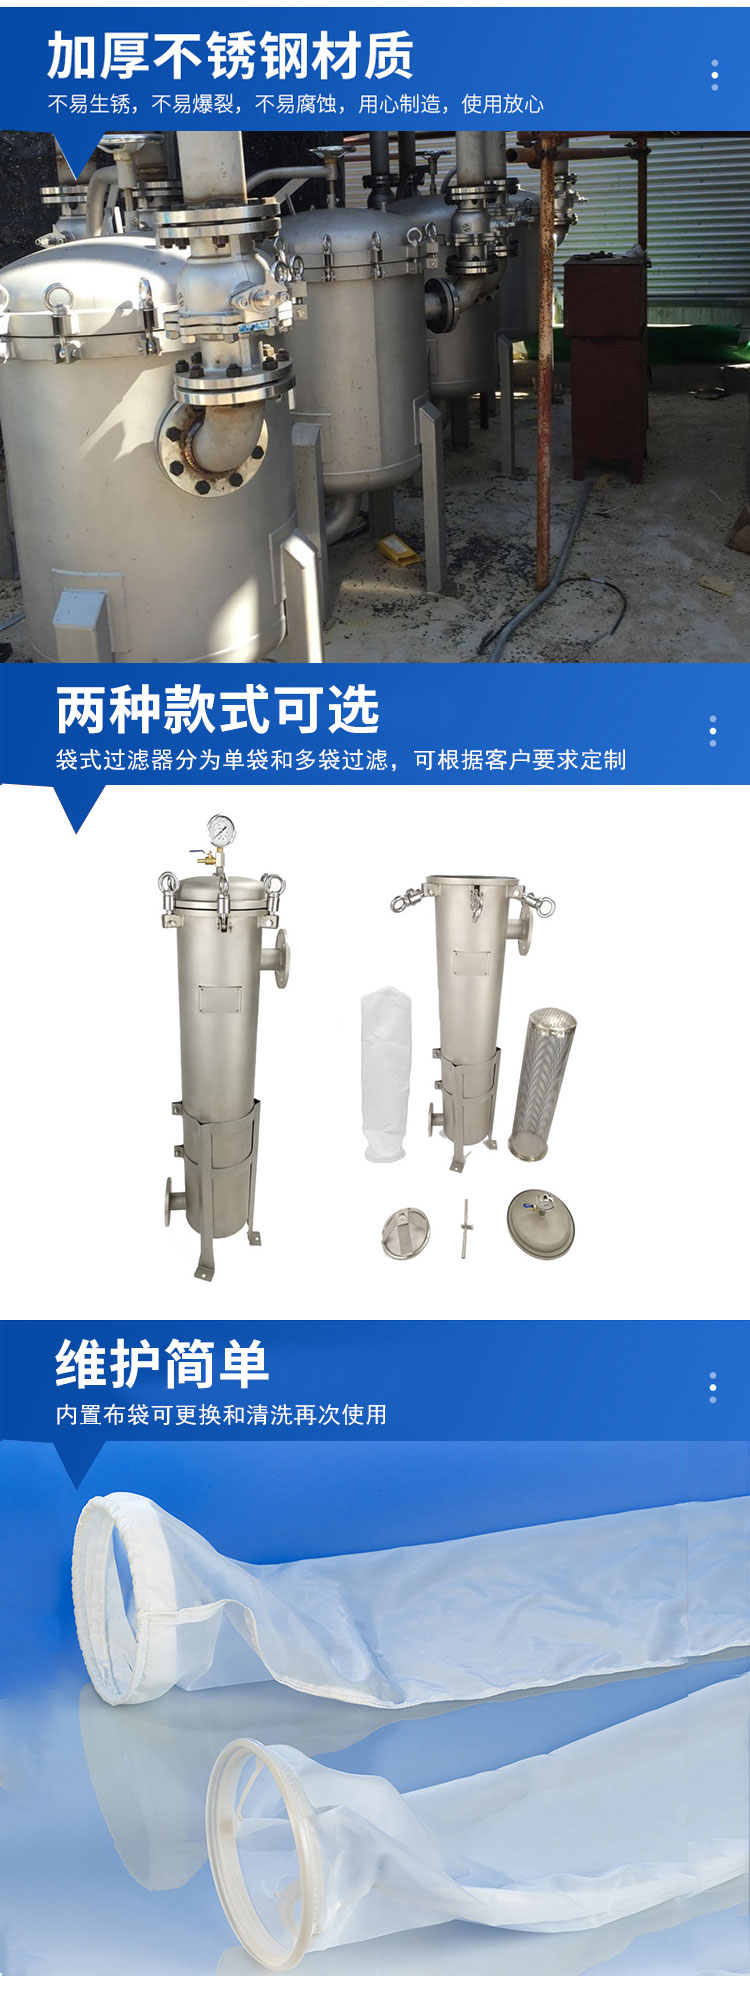 1.5MPa bag filter equipment, stainless steel filter, Hanke non-woven fabric filter material